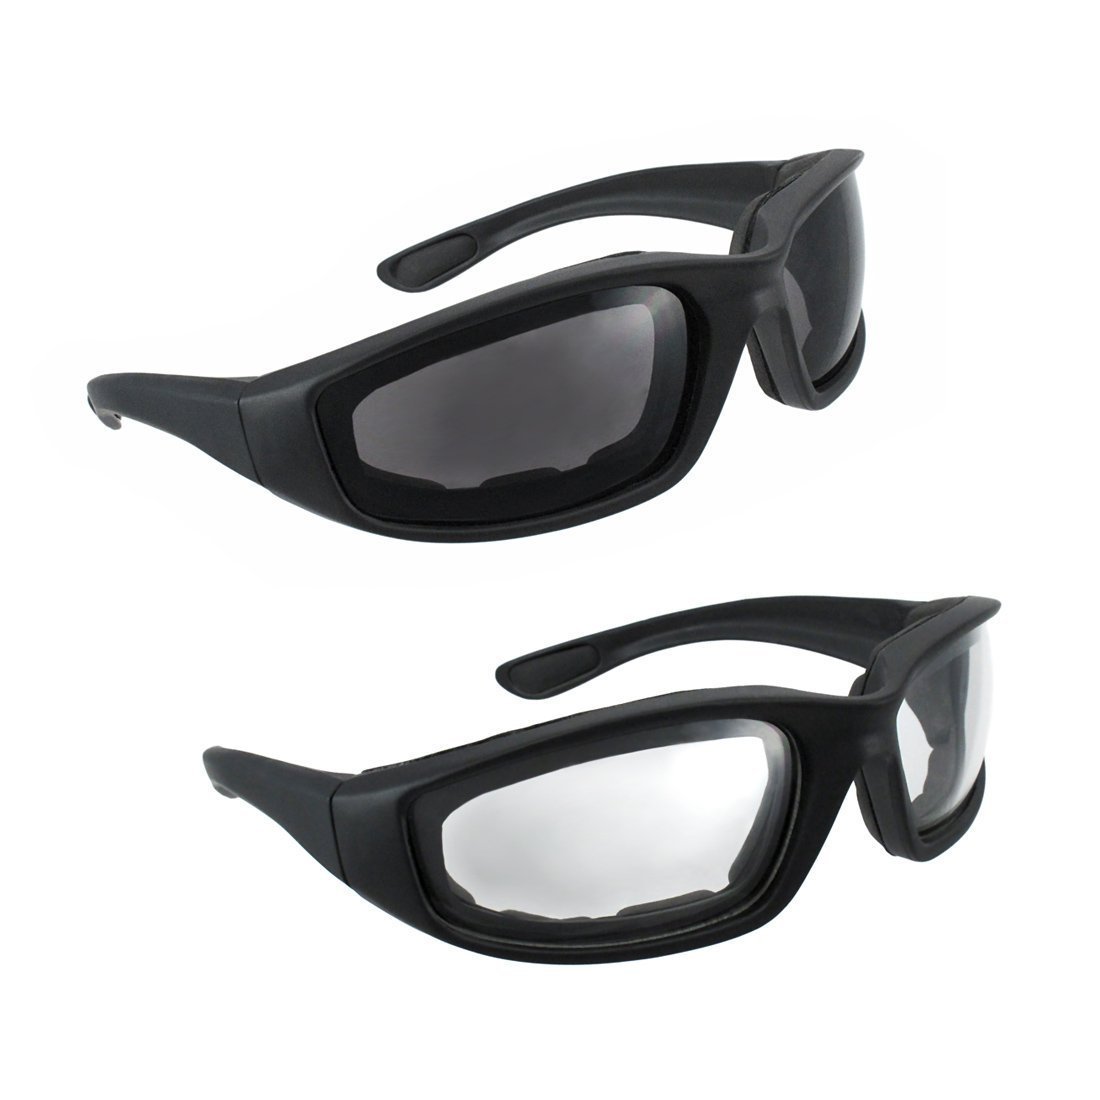 Eye Protection Best Motorcycle Riding Glasses Reviewed Big Bike